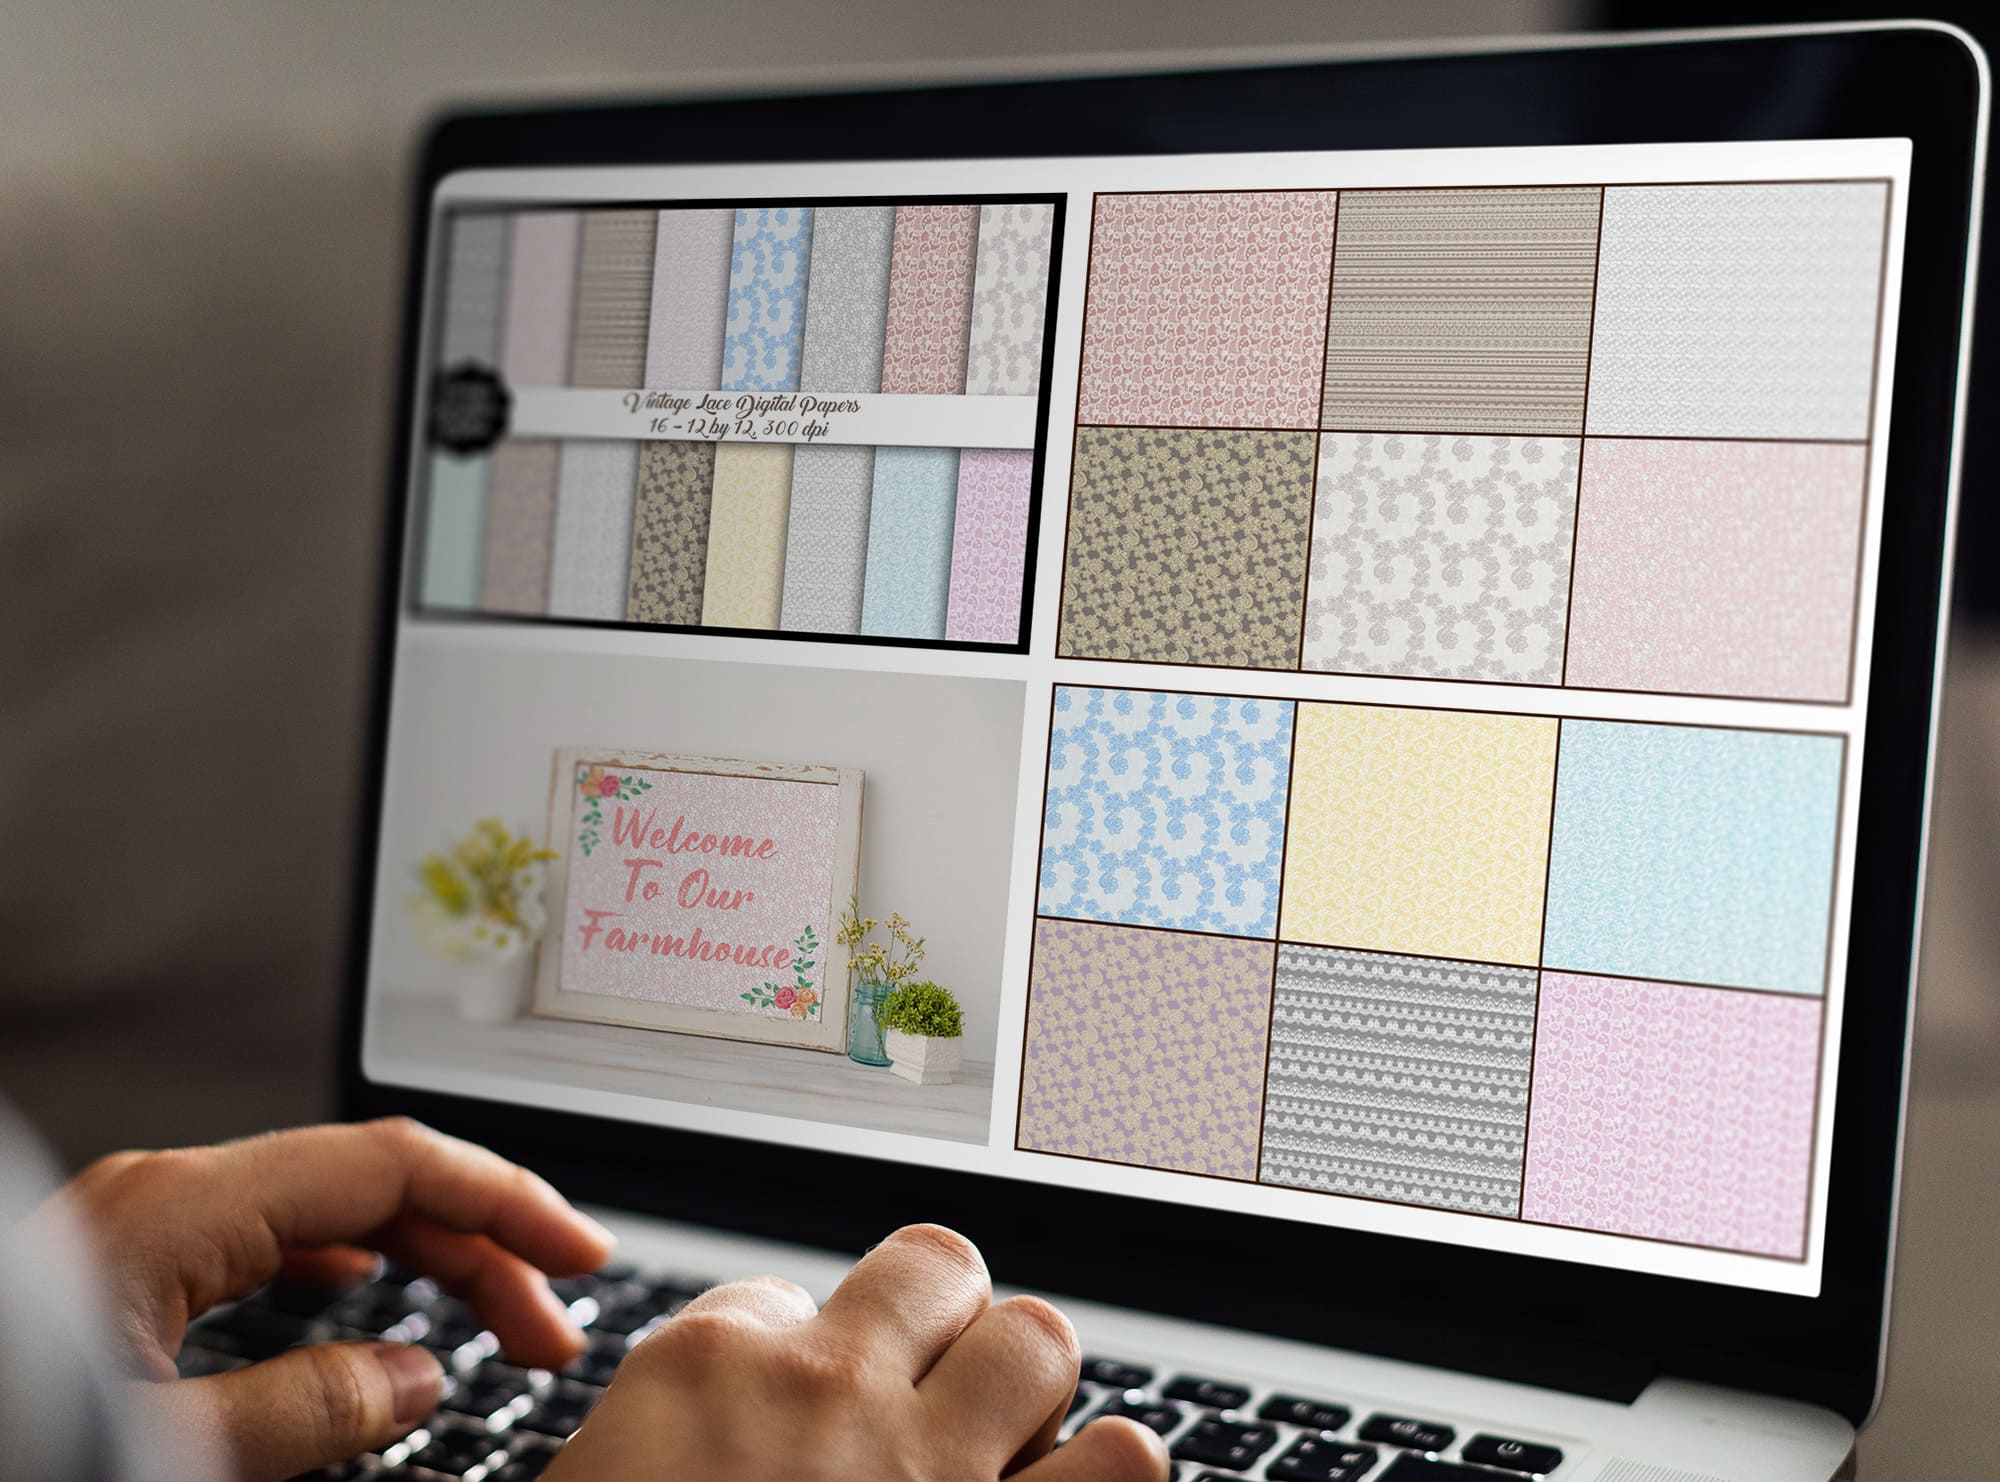 Vintage Lace Digital Papers, Shabby Chic Backgrounds on the MacBook Mockup.